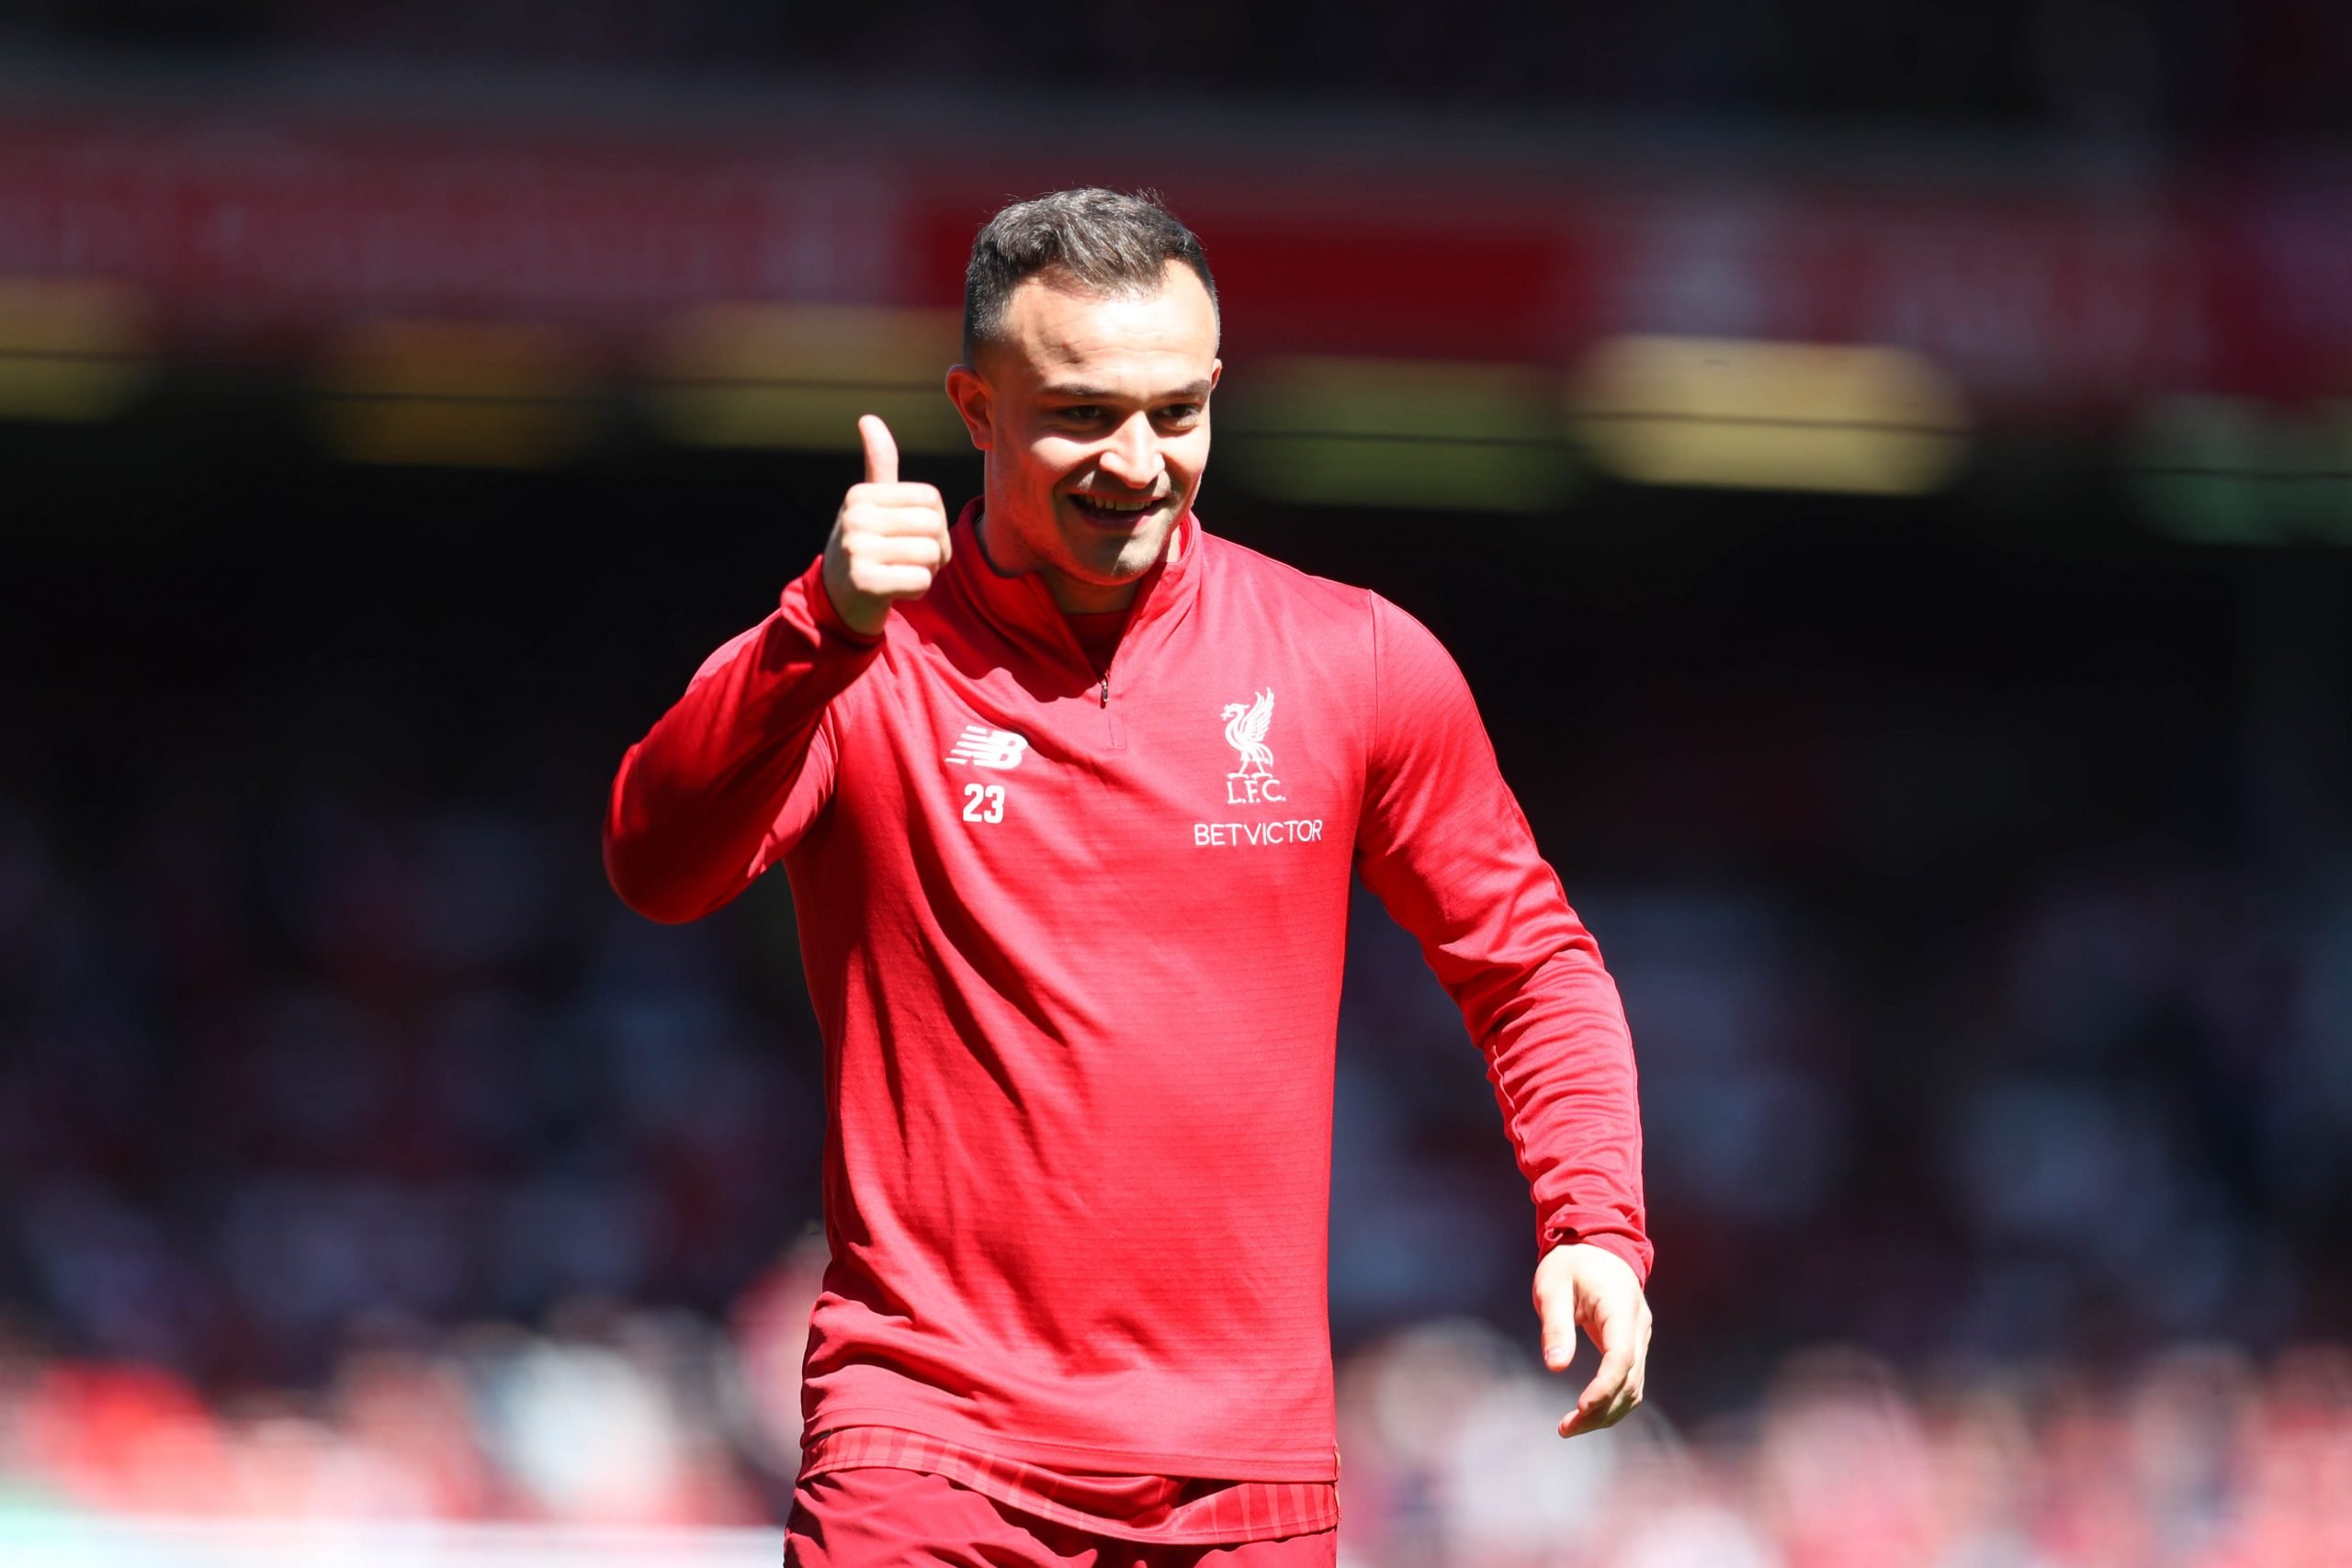 Xherdan Shaqiri of Liverpool warms up prior to the Premier League match between Liverpool FC and Wolverhampton Wanderers at Anfield on May 12, 2019 in Liverpool, United Kingdom. (Photo by Catherine Ivill/Getty Images)